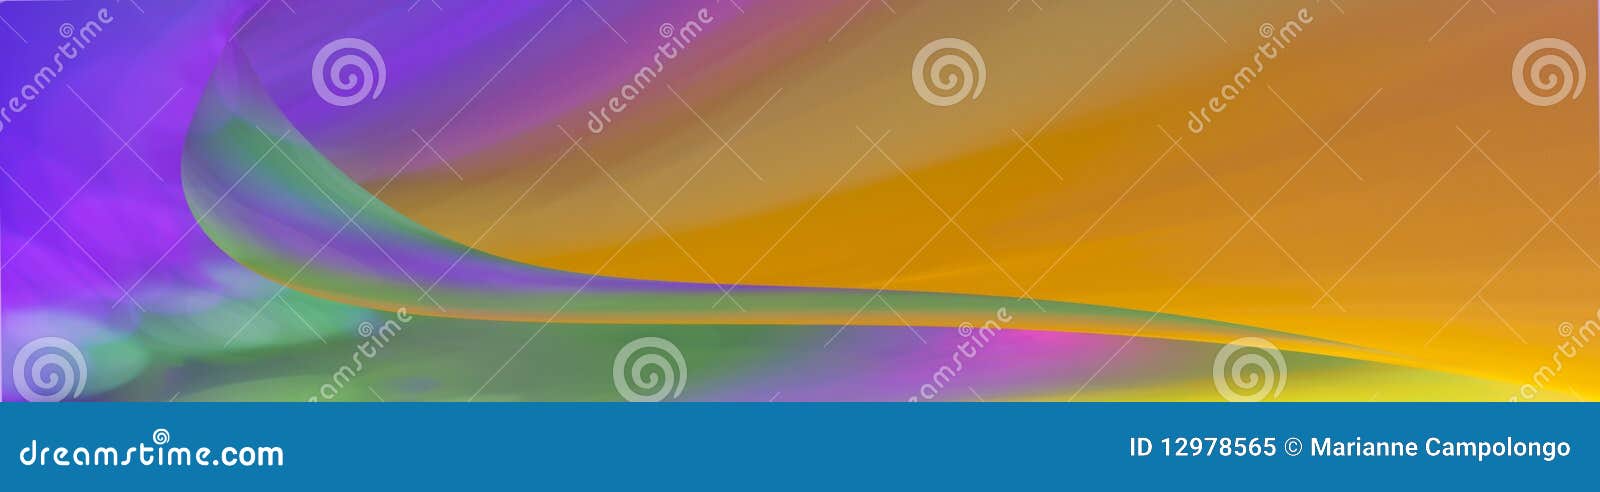 abstract web banner with wave